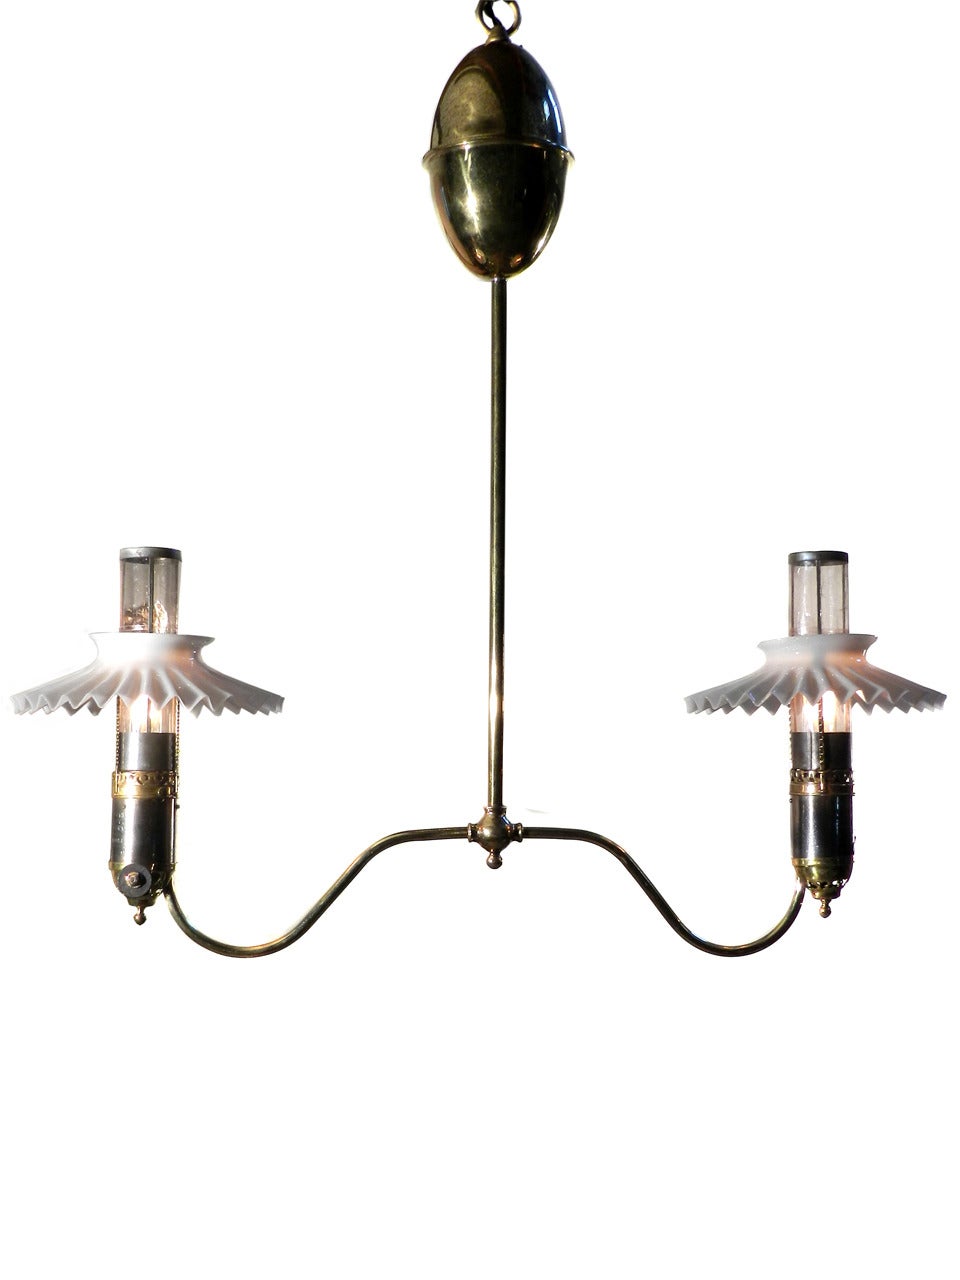 American Original Twin Gravity Gas Lamp Converted to Electric